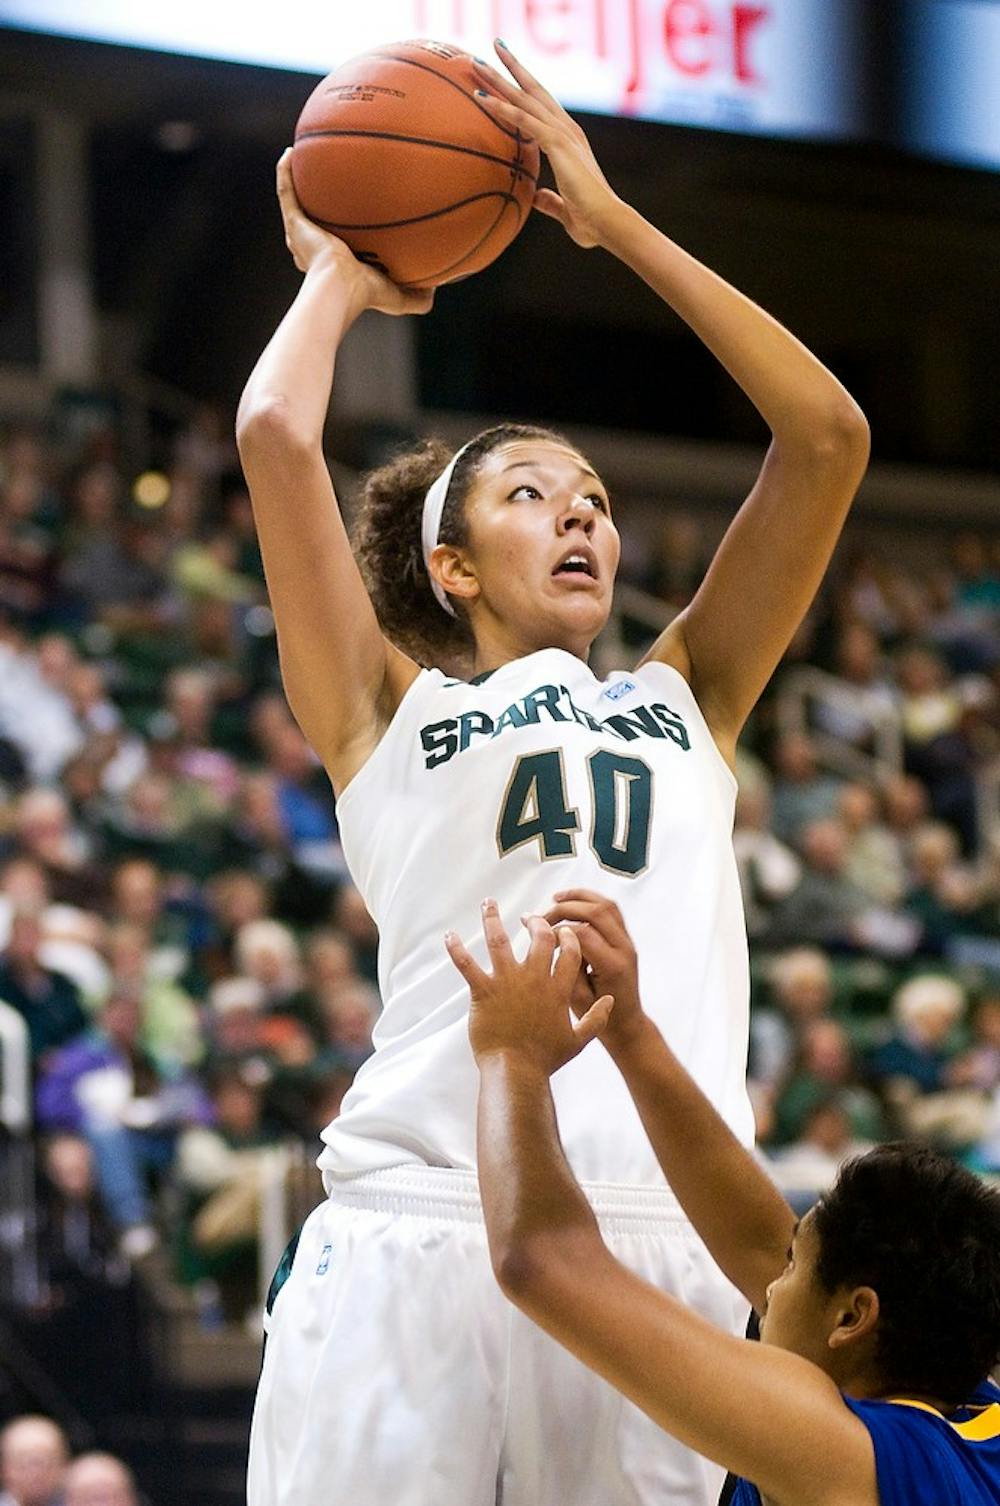 Then-redshirt-freshman center Madison Williams shoots over Lake Superior State guard Raven Trammell on Nov. 3, 2011, at the Breslin Center. The Spartans defeated the Lakers 94-31. State News File Photo